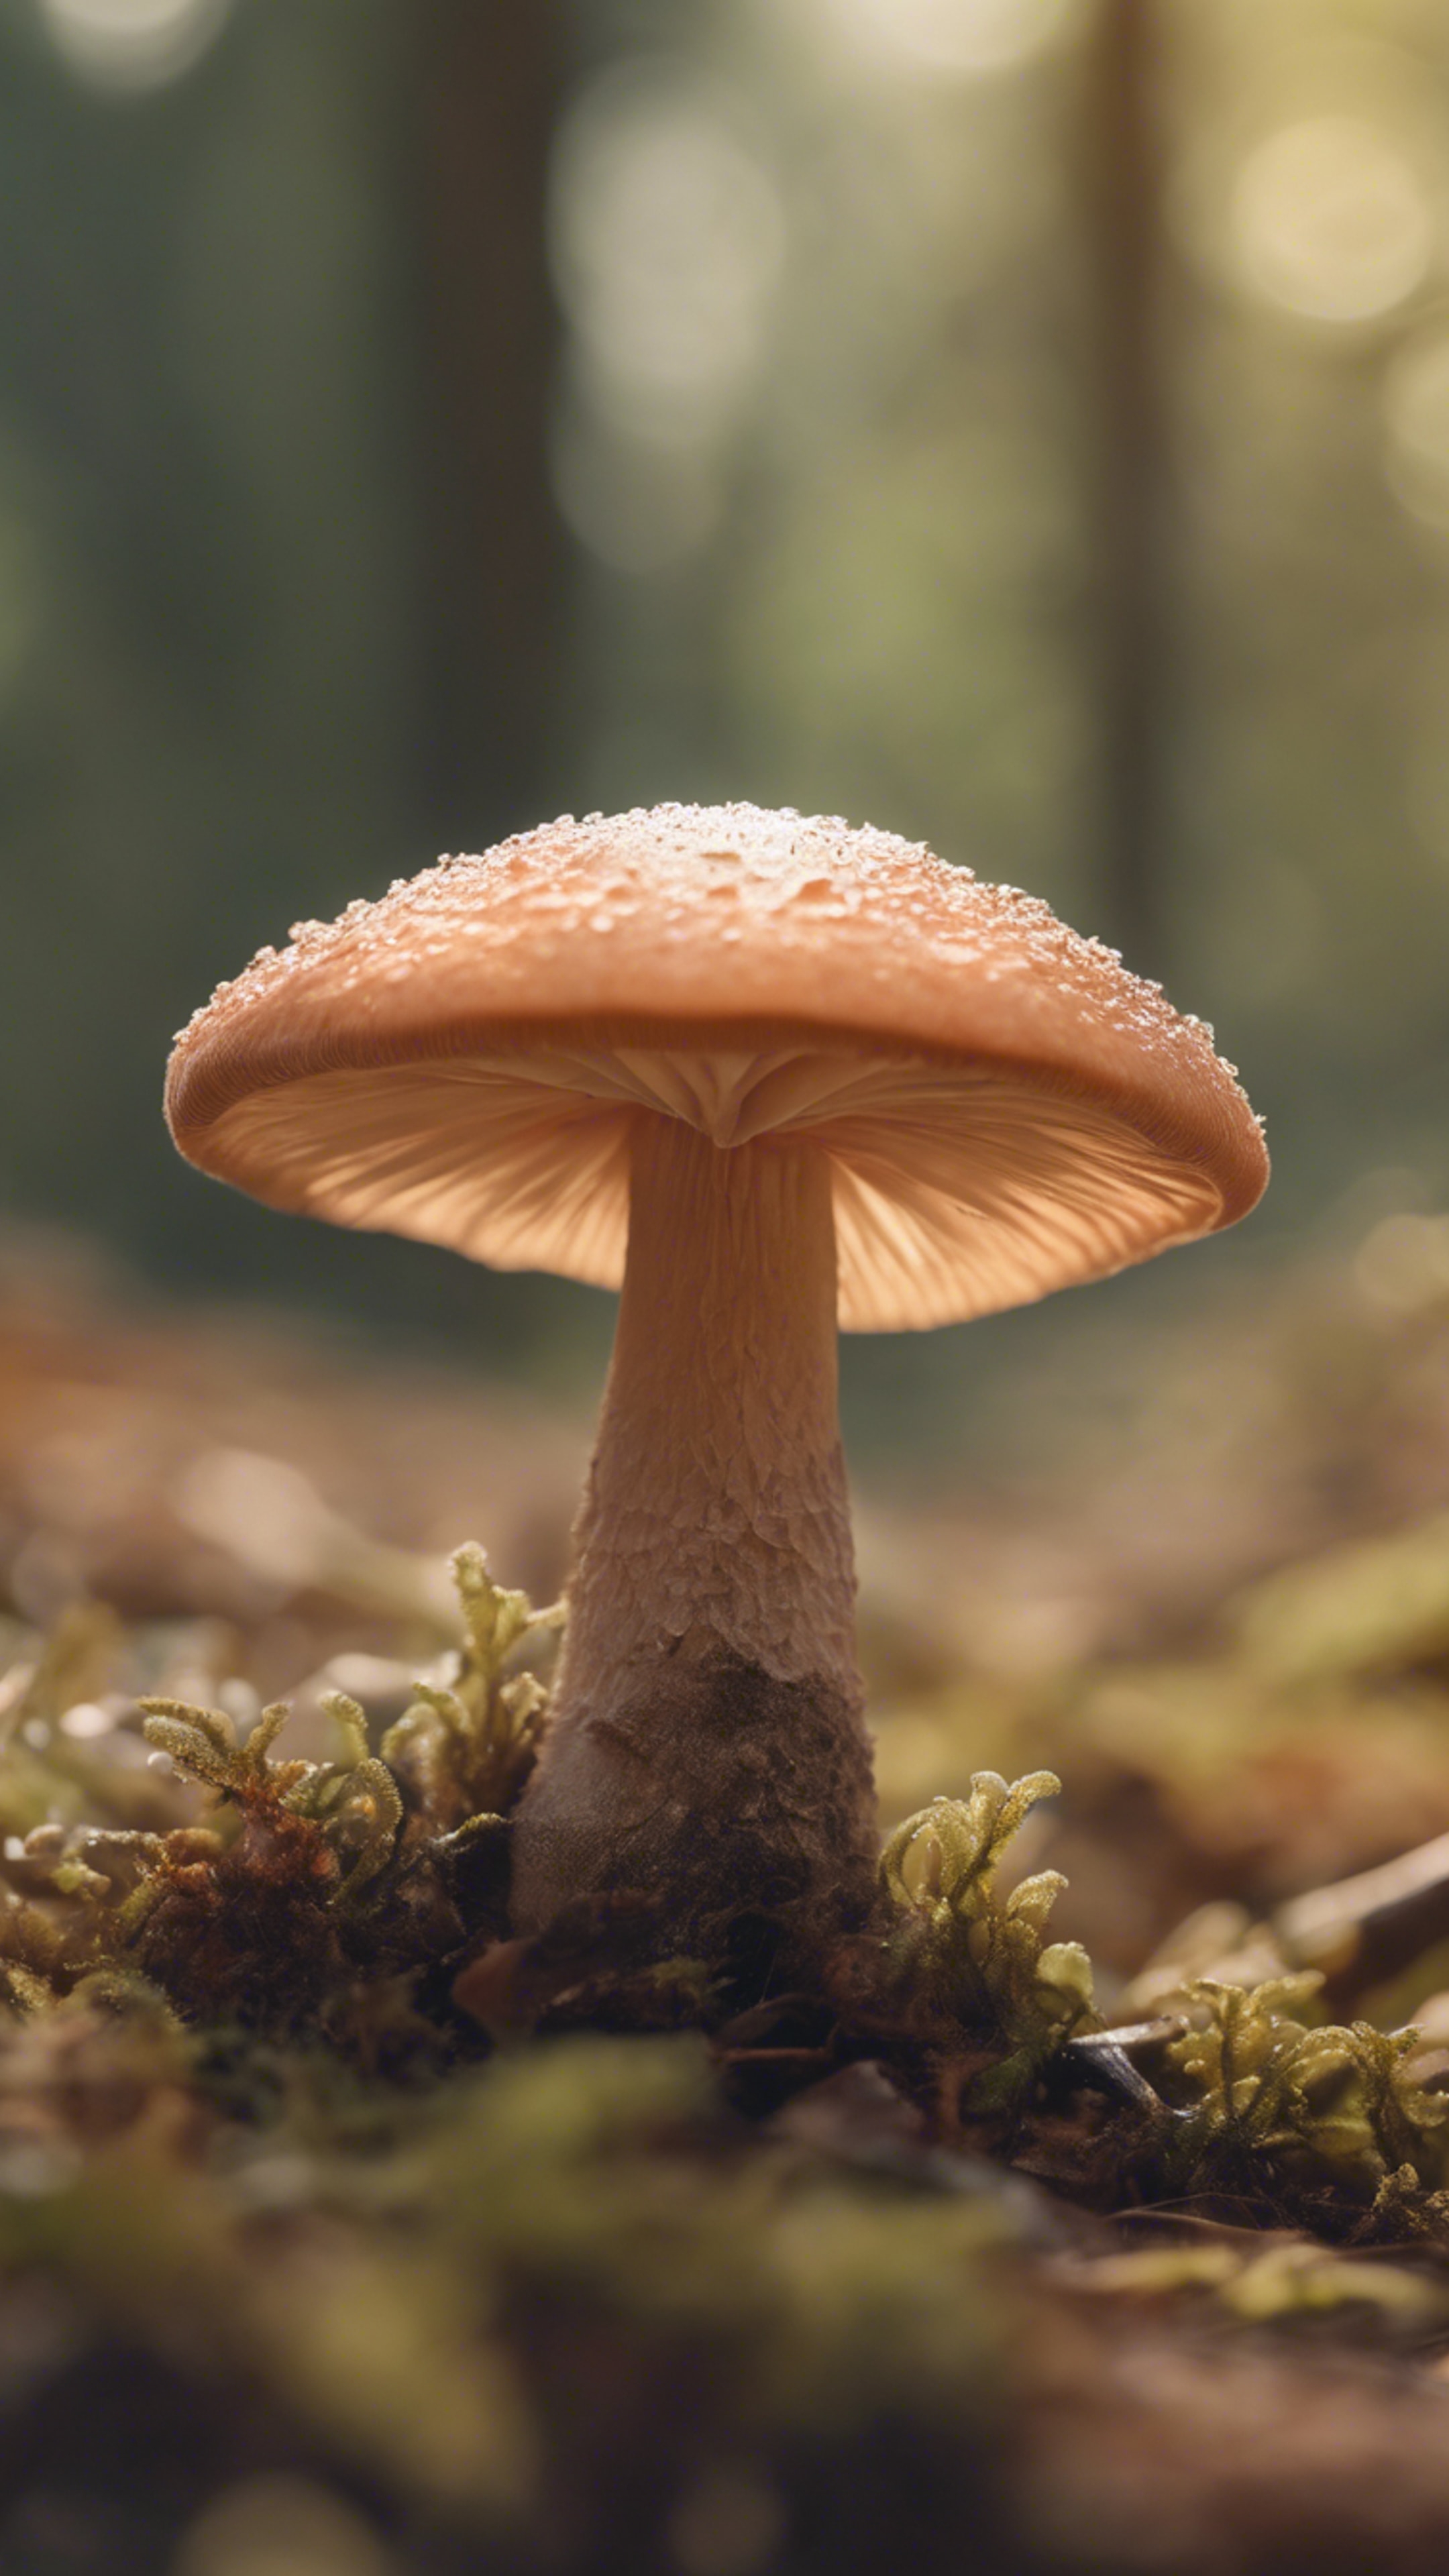 A close-up of a small, cute mushroom, peach color, with soft, sunlit forest scenery in the background. Papel de parede[125df3bad49b42d8bf38]